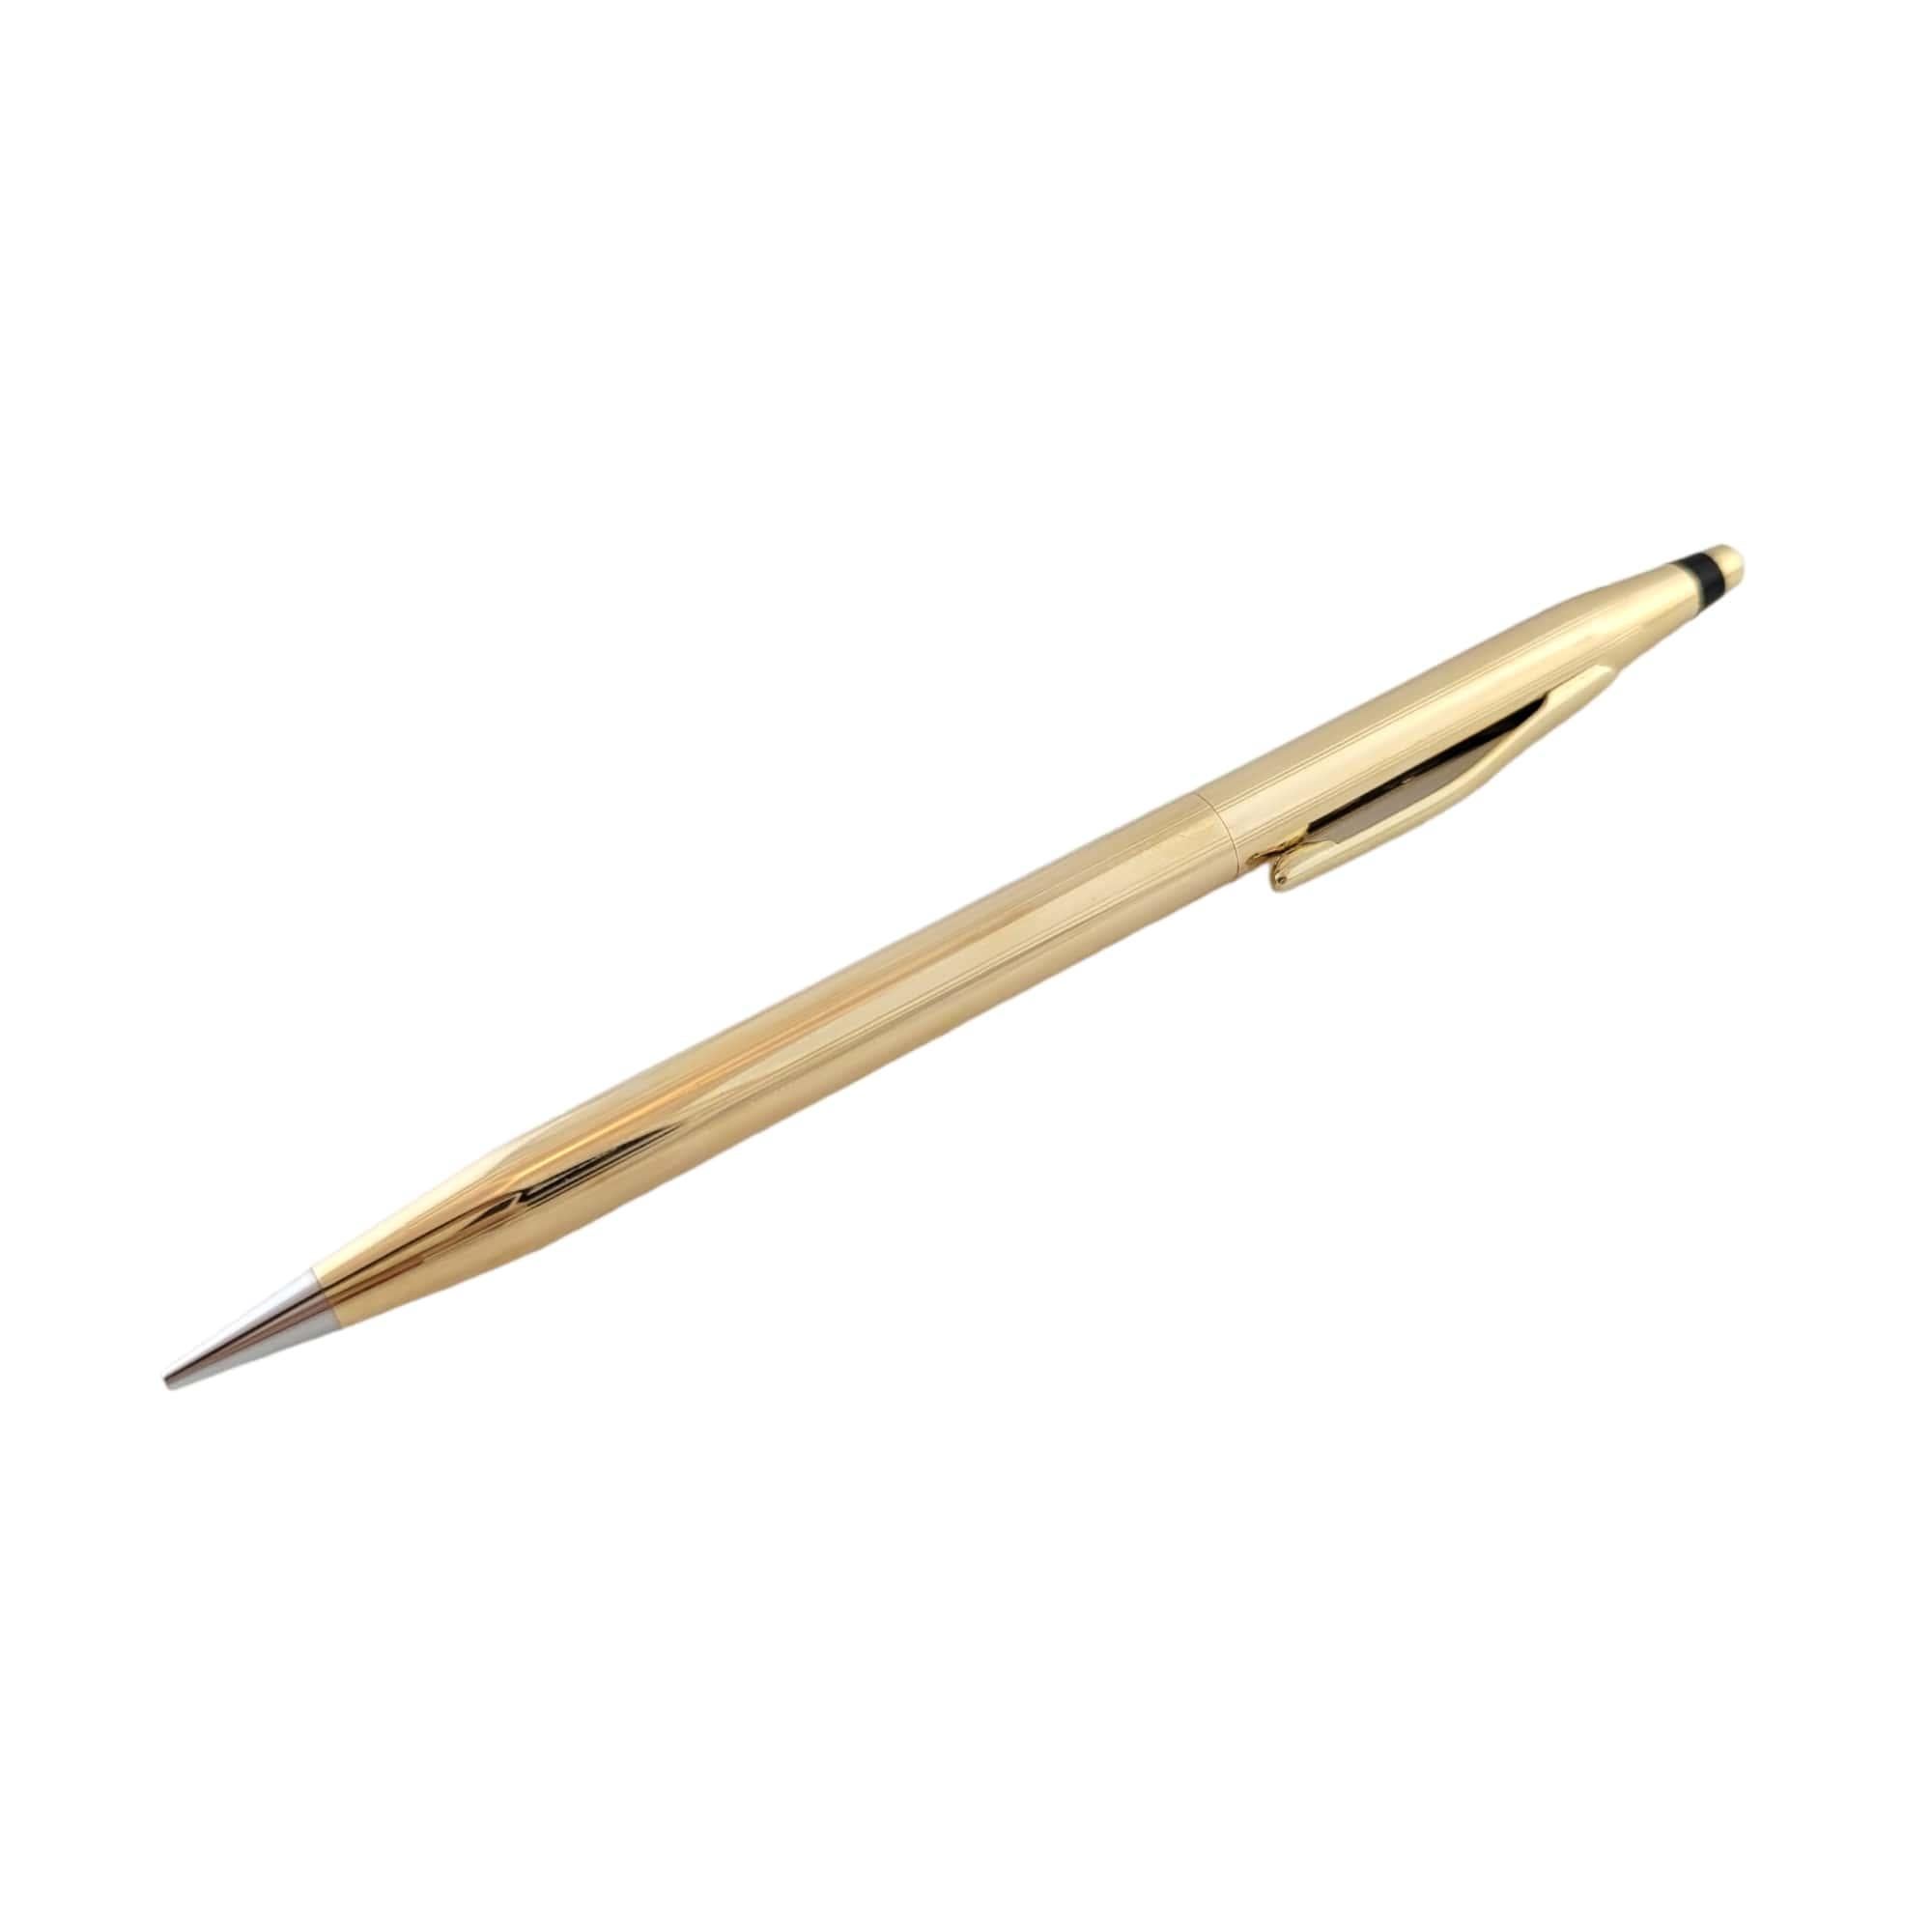 Vintage 14K Yellow Gold Cross Pencil

Beautiful 14K yellow gold pencil with black detailing. Presently writing.

Length: 5 1/4